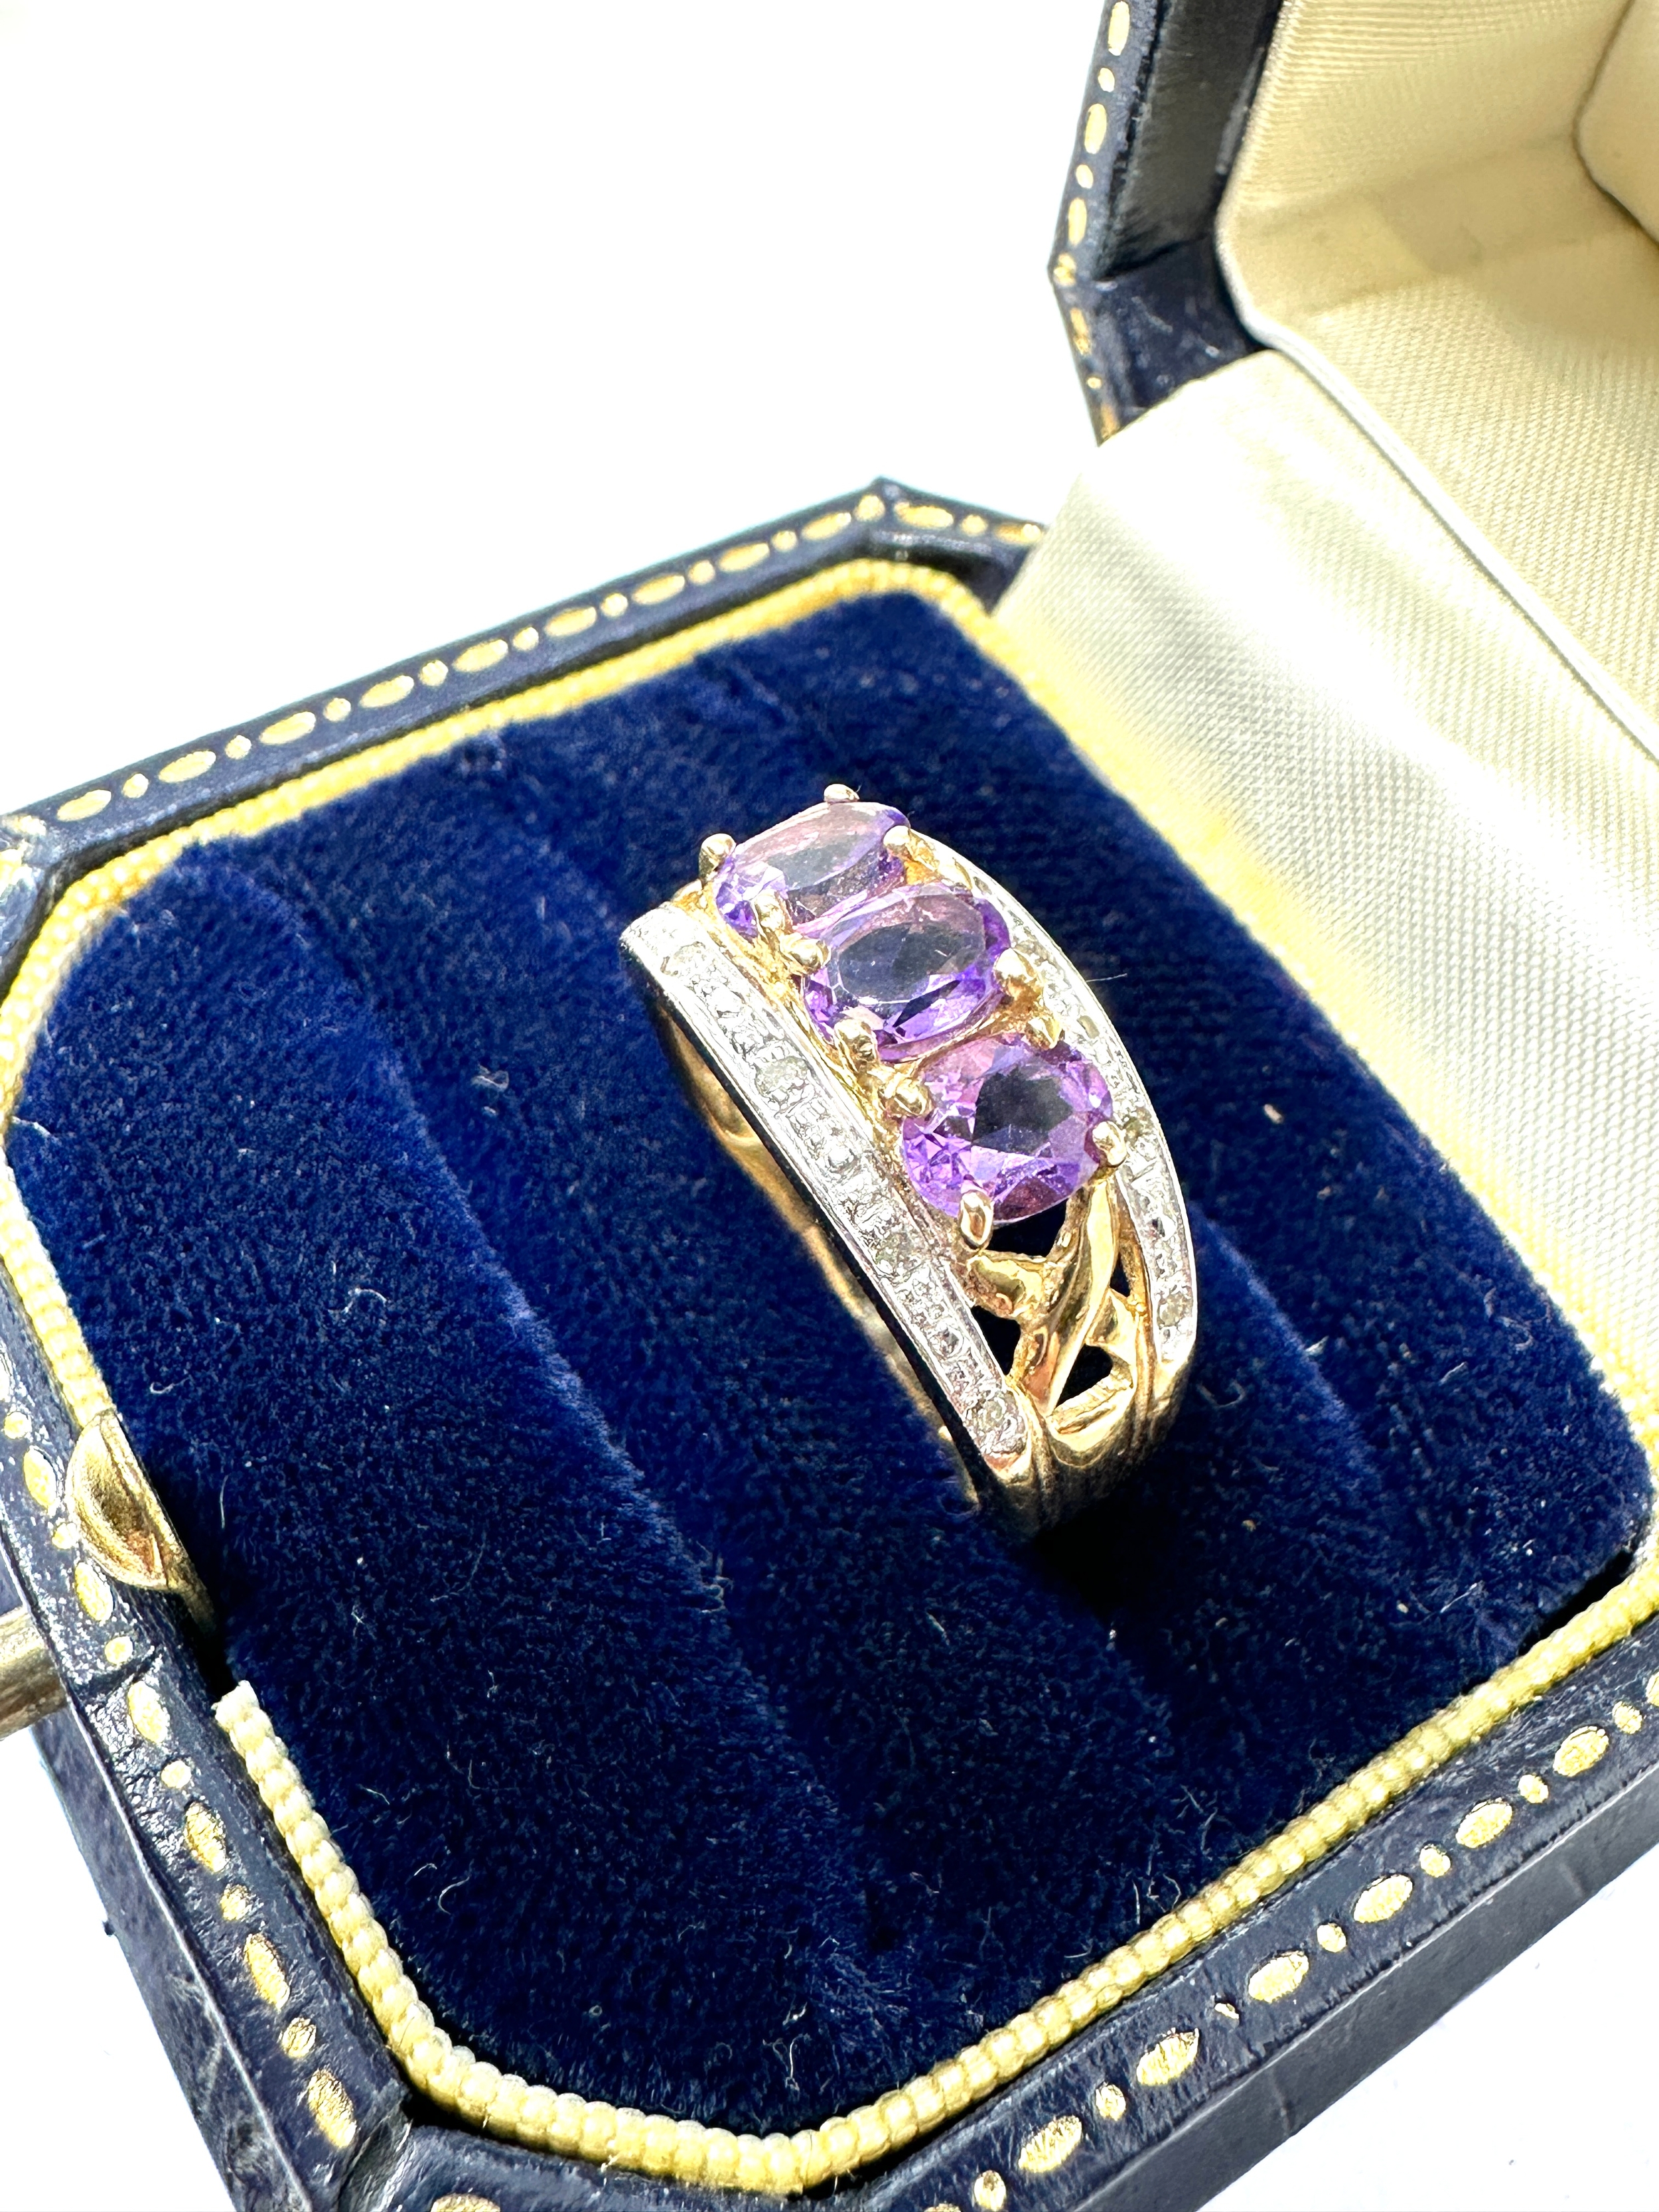 9ct gold amethyst & diamond ring weight 3.8g - Image 2 of 4